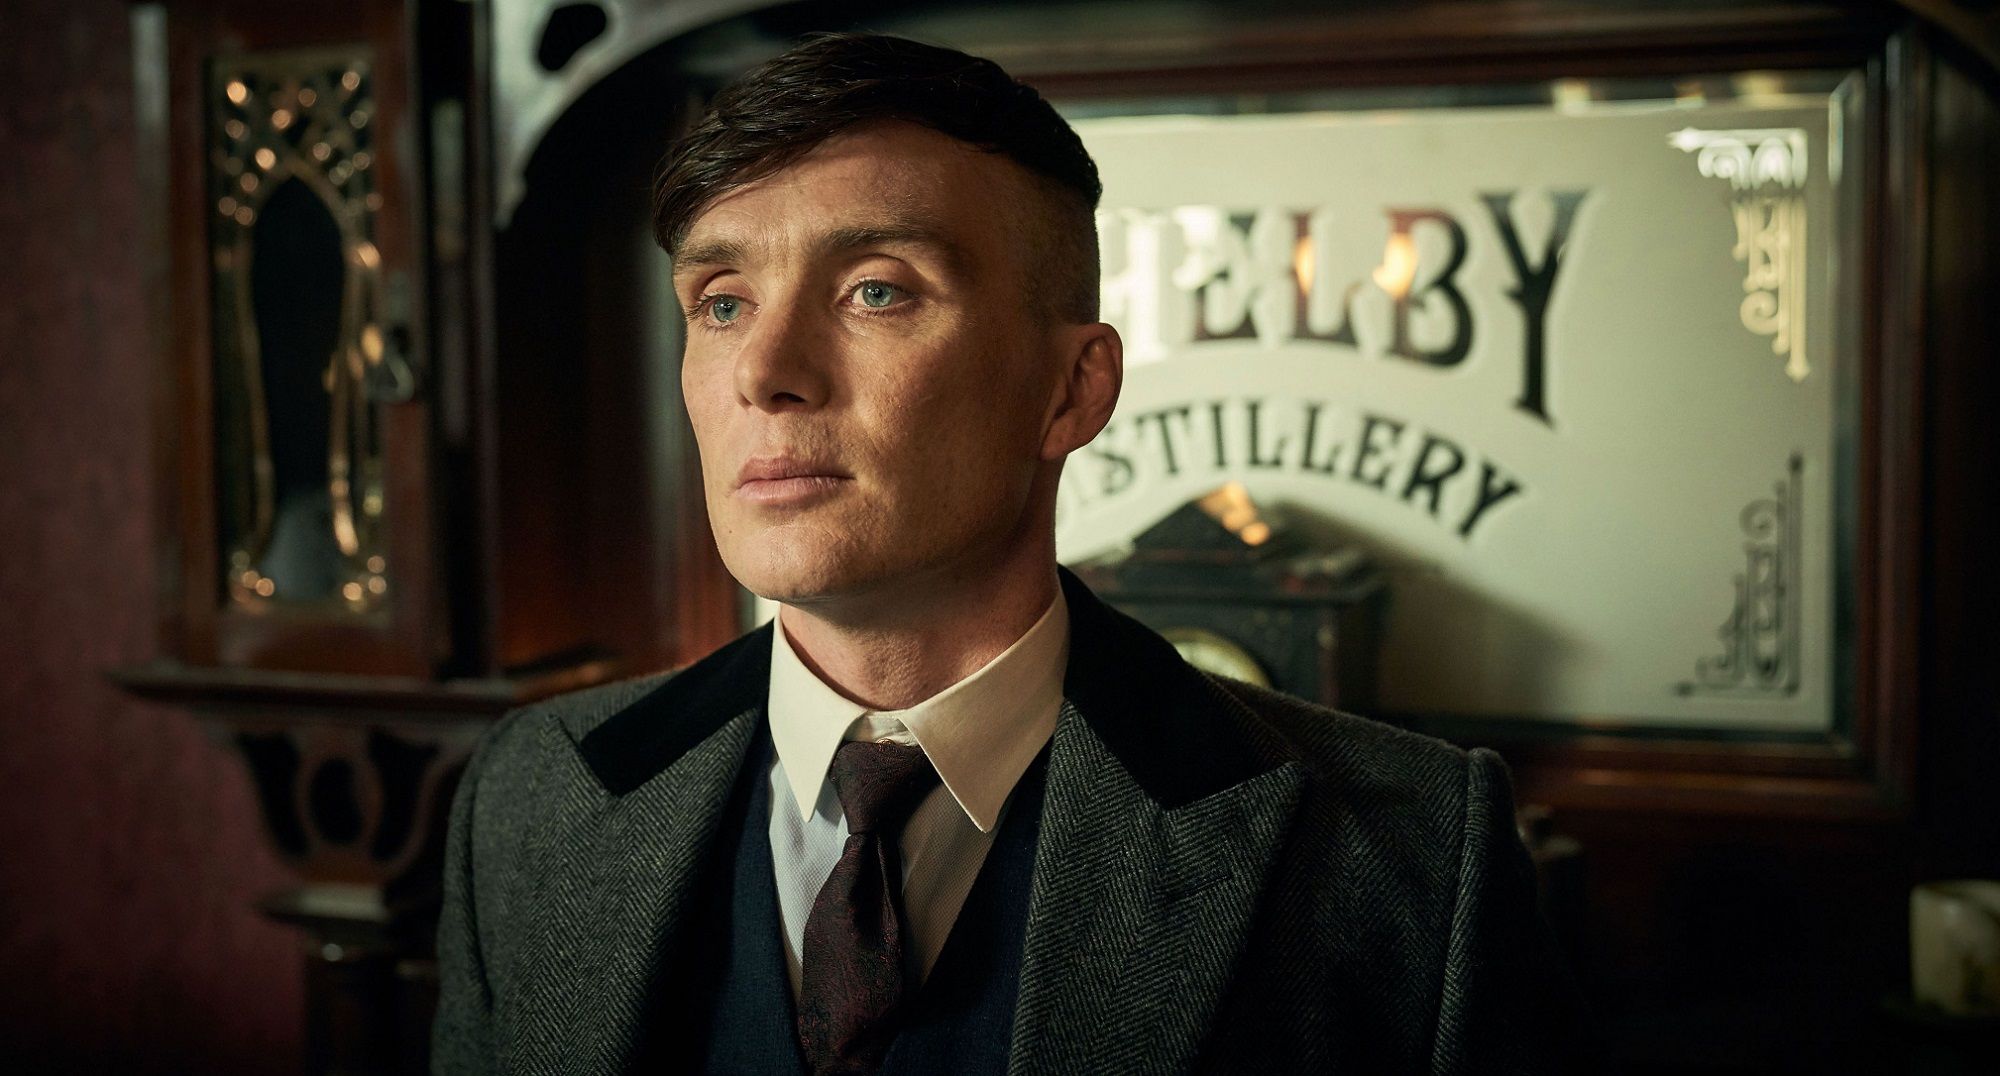 Peaky Blinders Tommy Shelby standing in front of a door